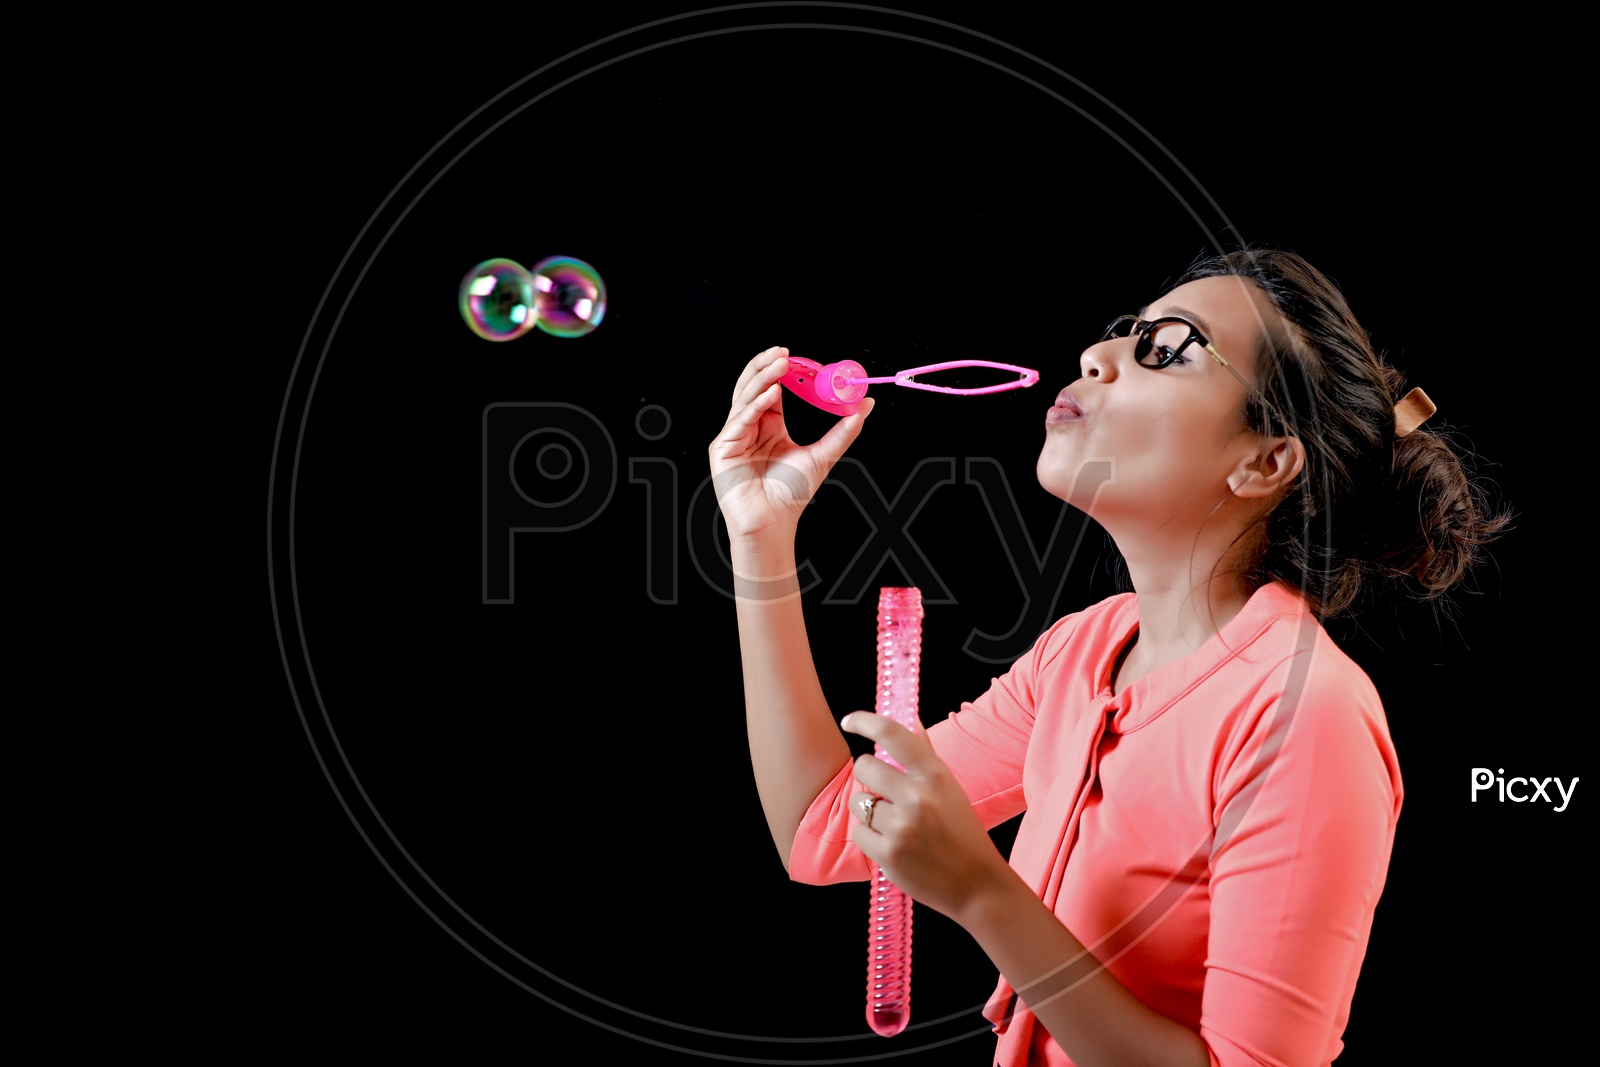 Indian Young  Girl Blowing Bubbles on an Isolated Black Background